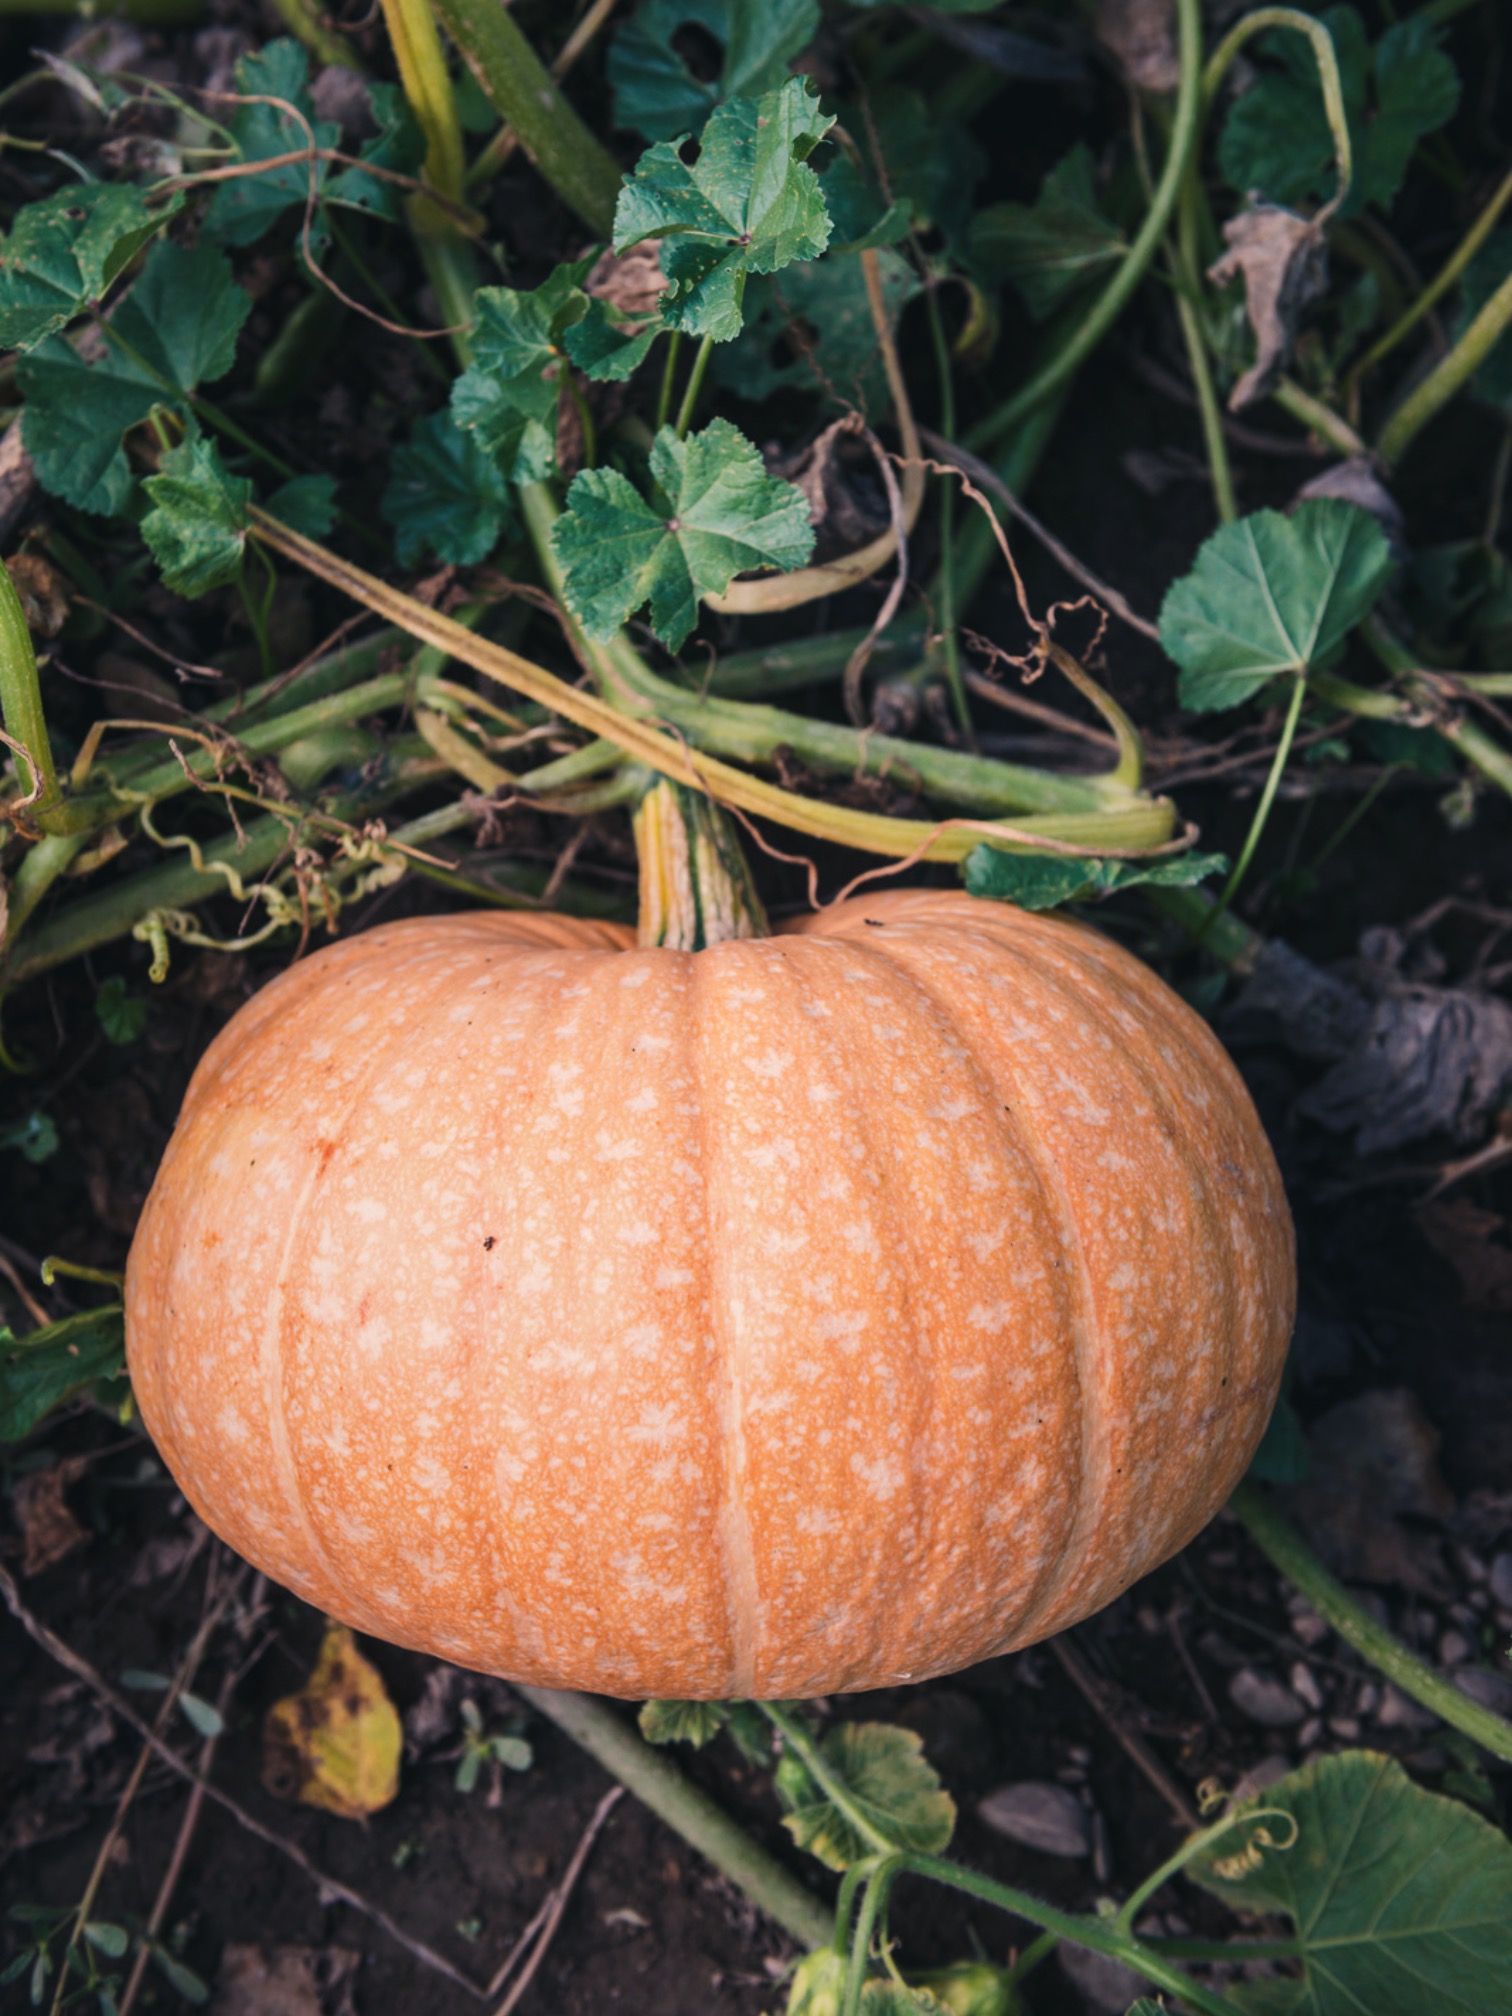 A close up view of a pumpkin growing in the garden